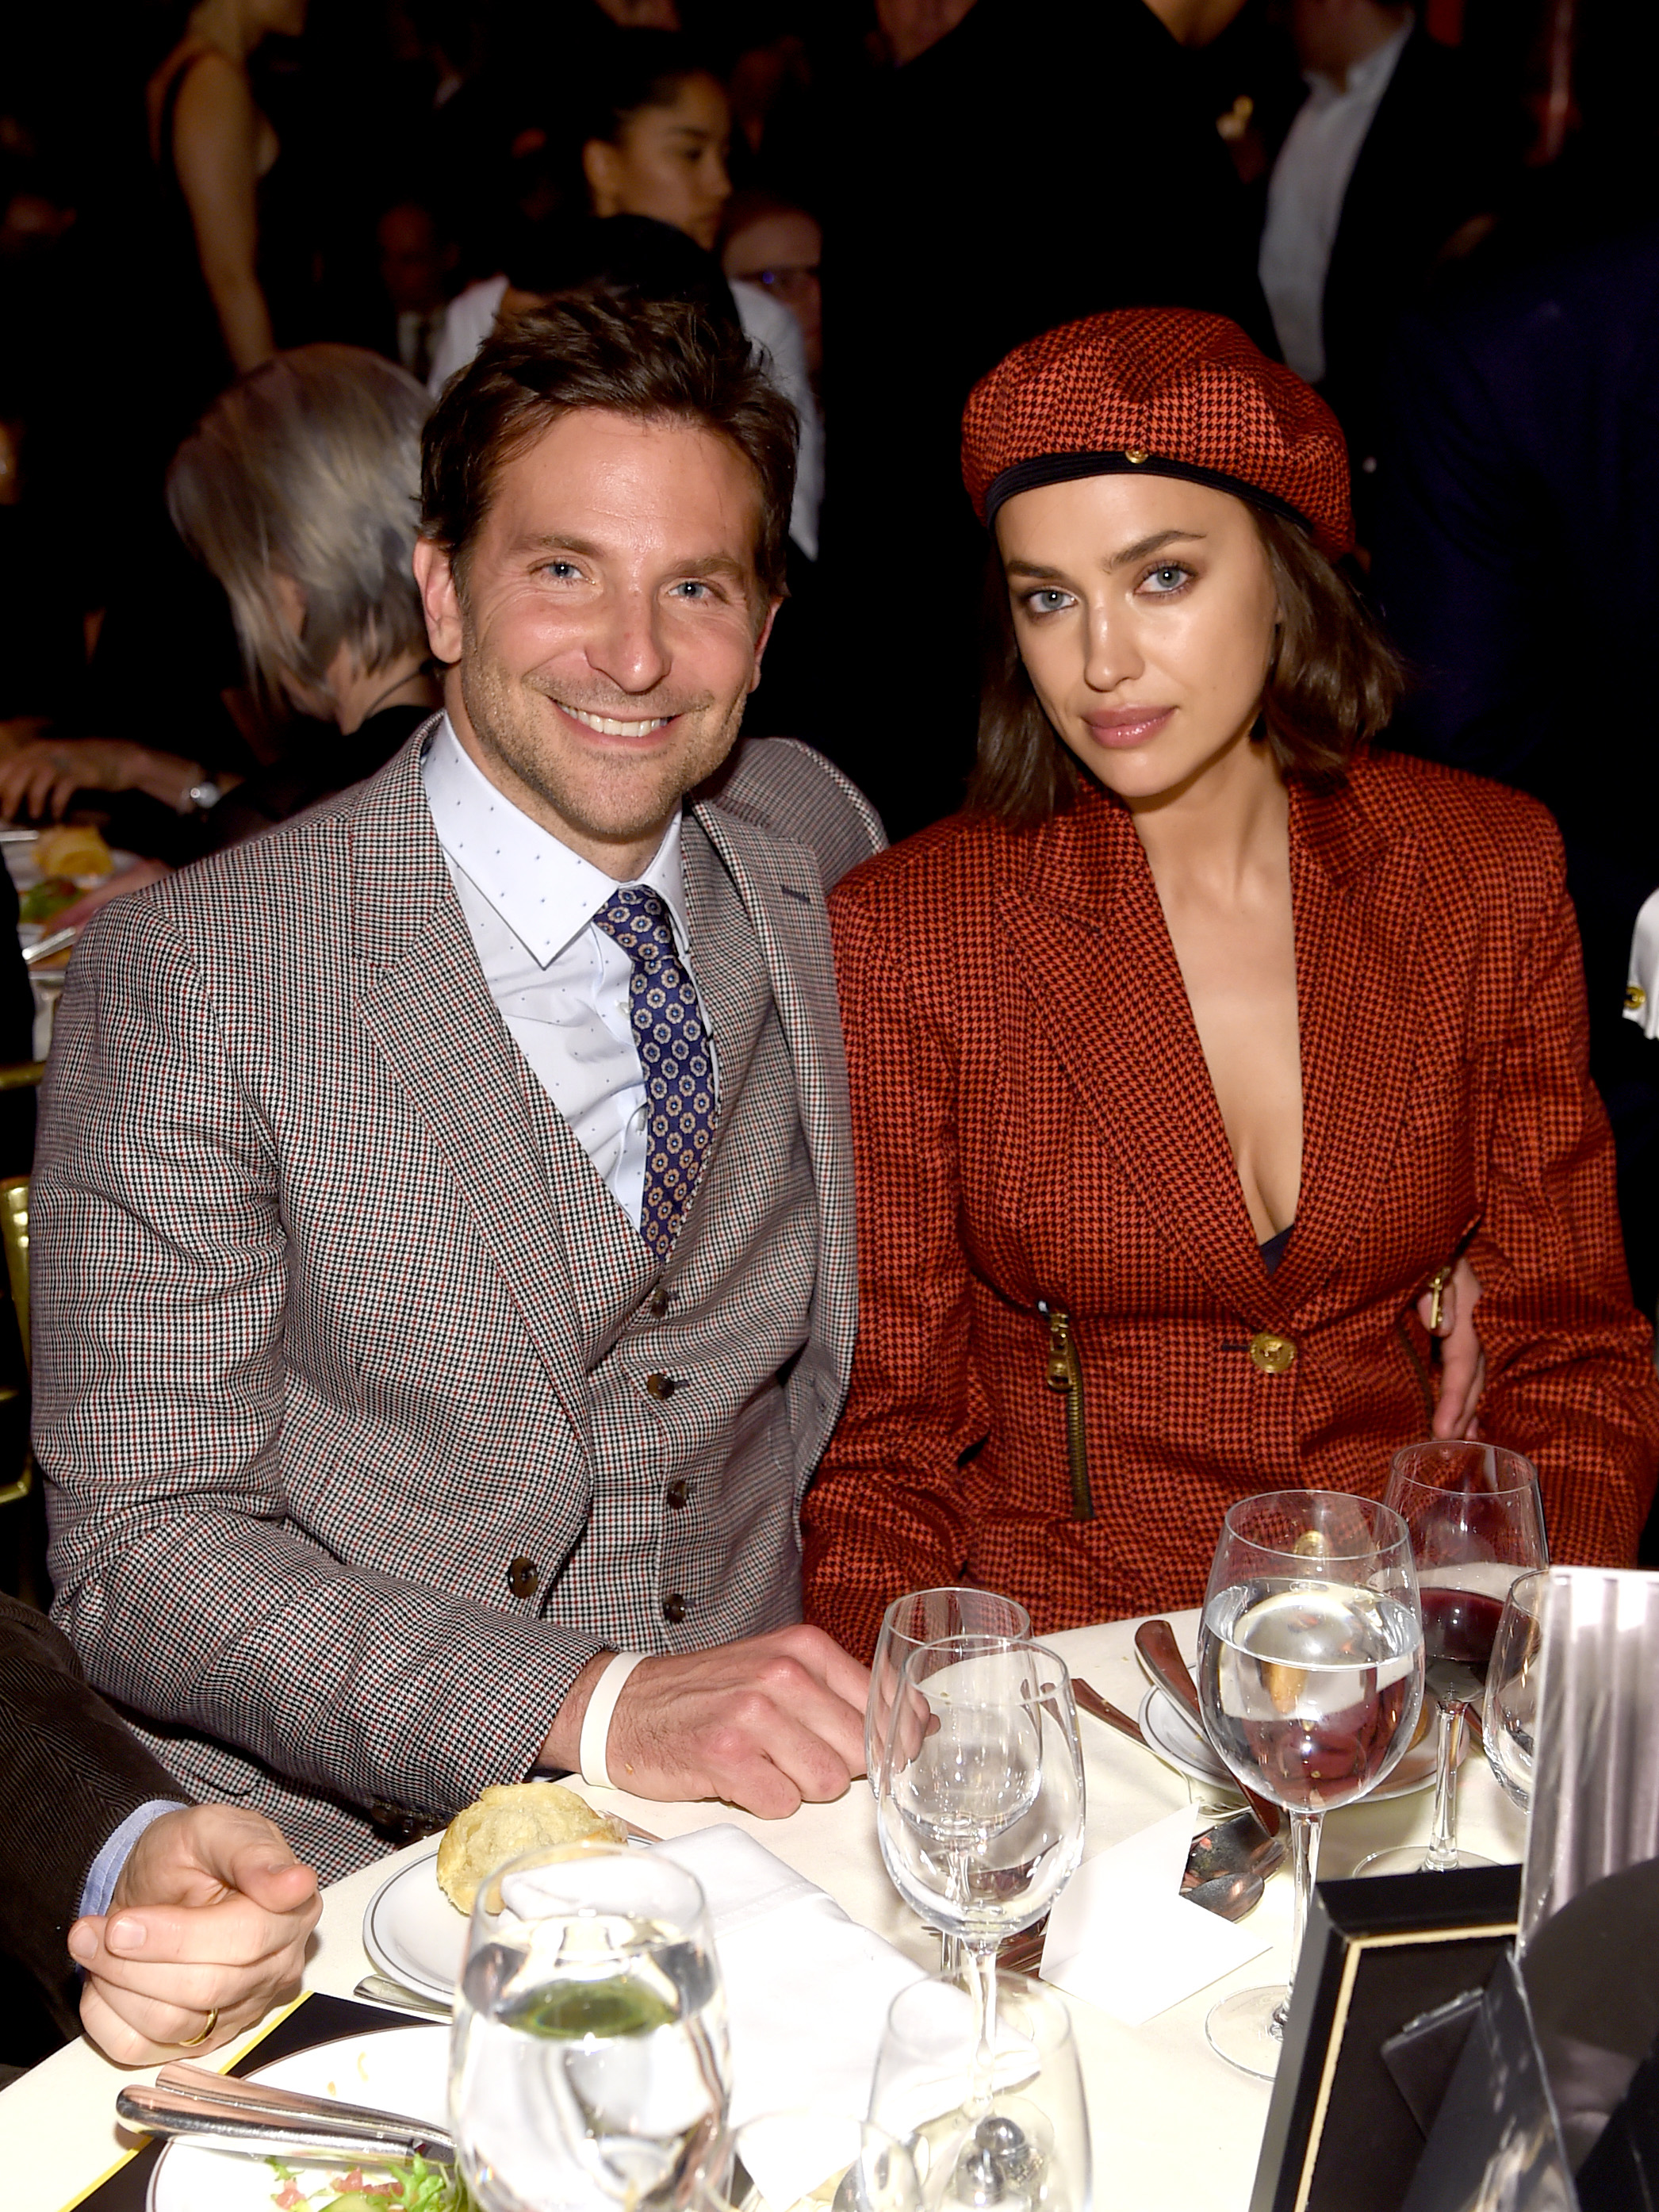 Bradley Cooper and Irina Shayk attend The National Board of Review Annual Awards Gala at Cipriani 42nd Street on January 8, 2019, in New York City